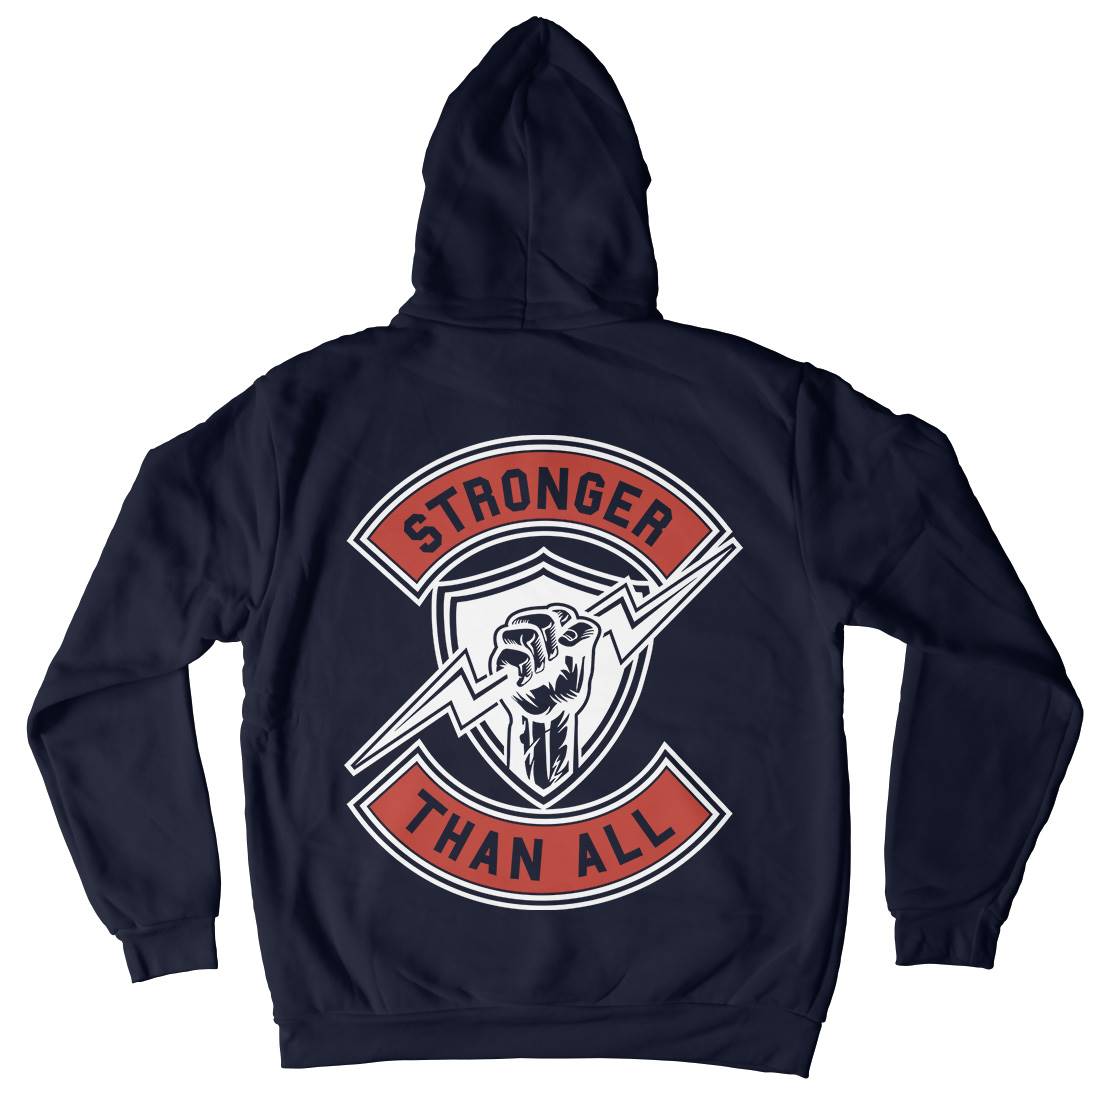 Stronger Than All Mens Hoodie With Pocket Gym A290